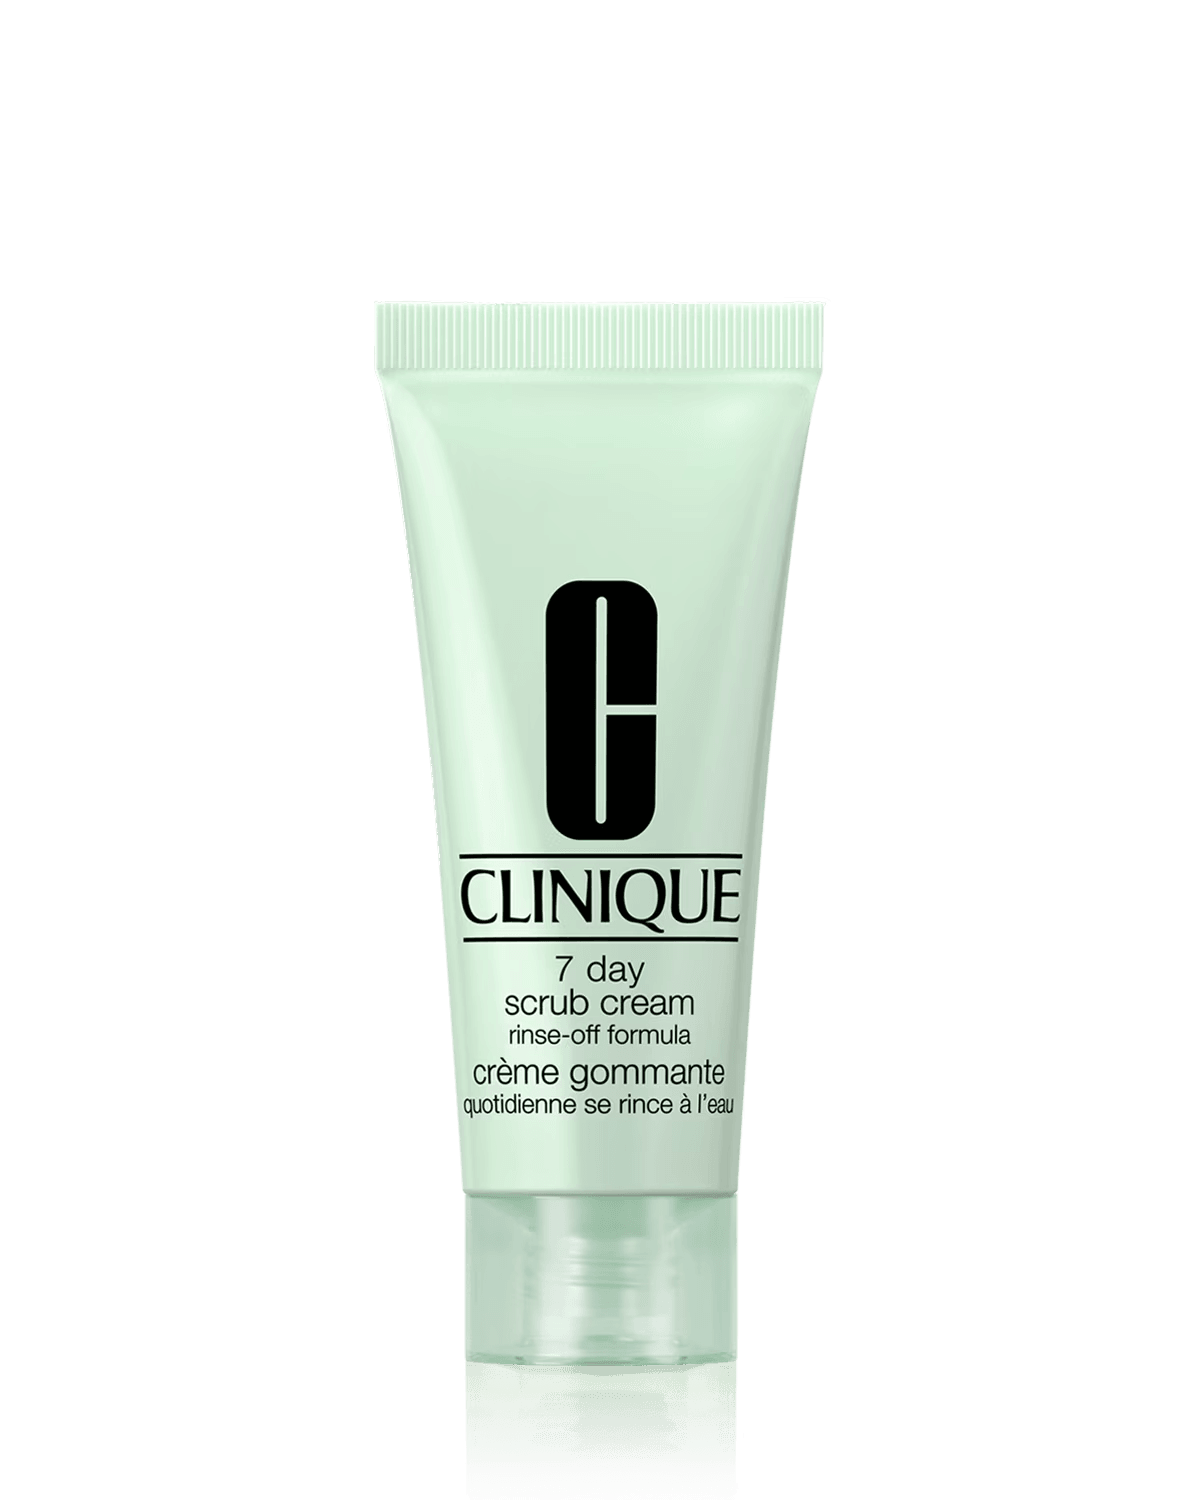 Крем-скраб Clinique 7 Day Rinse-Off Formula, 15 мл clinique 7 day scrub cream rinse off formula